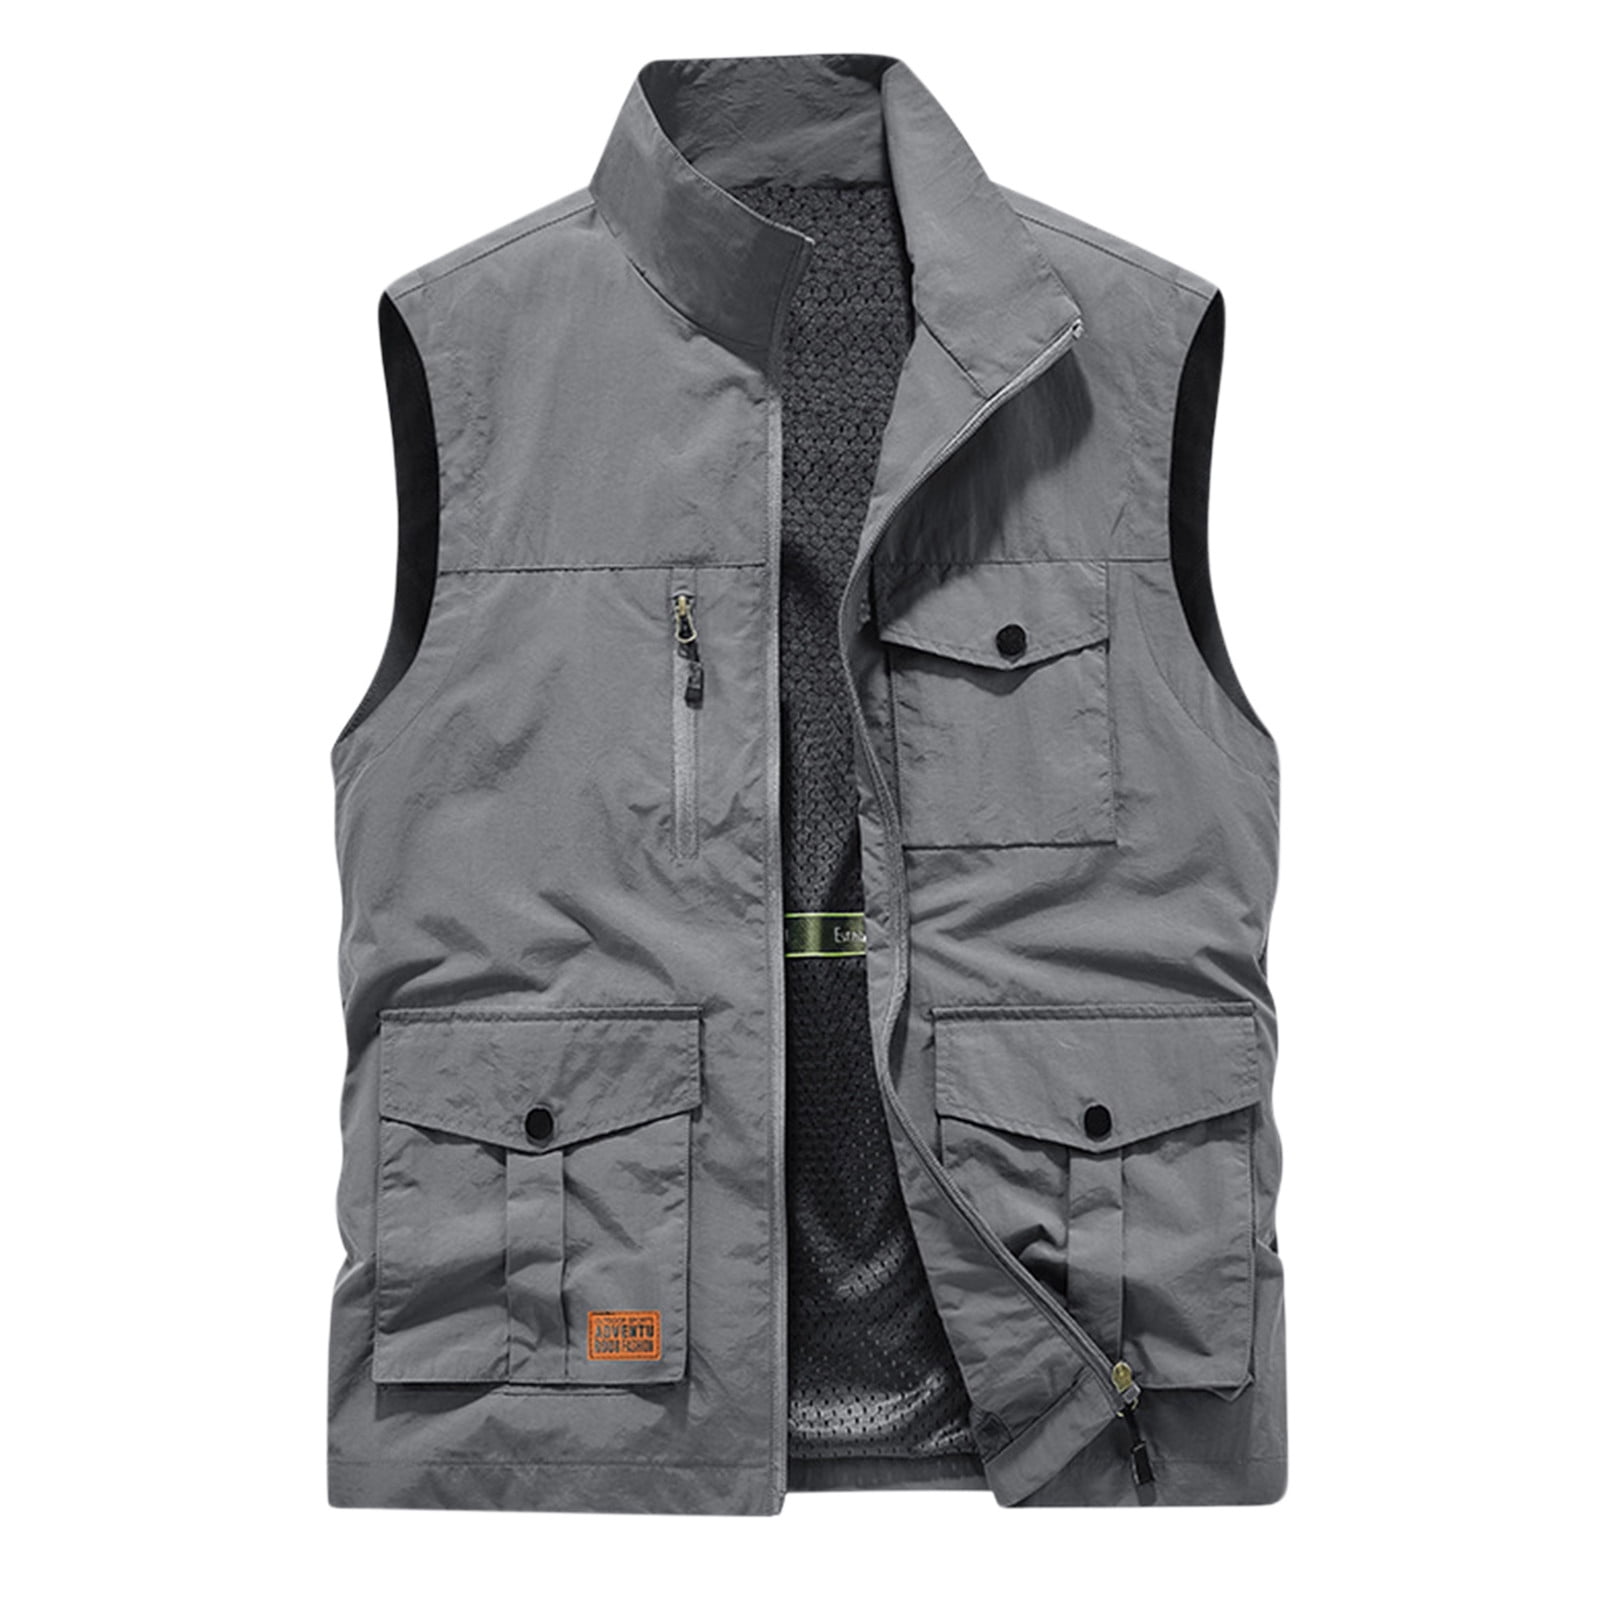 Brglopf Men's Outdoor Work Fishing Hiking Vests Jacket Casual Lightweight  Sleeveless Jacket Travel Photo Cargo Vest with Pockets